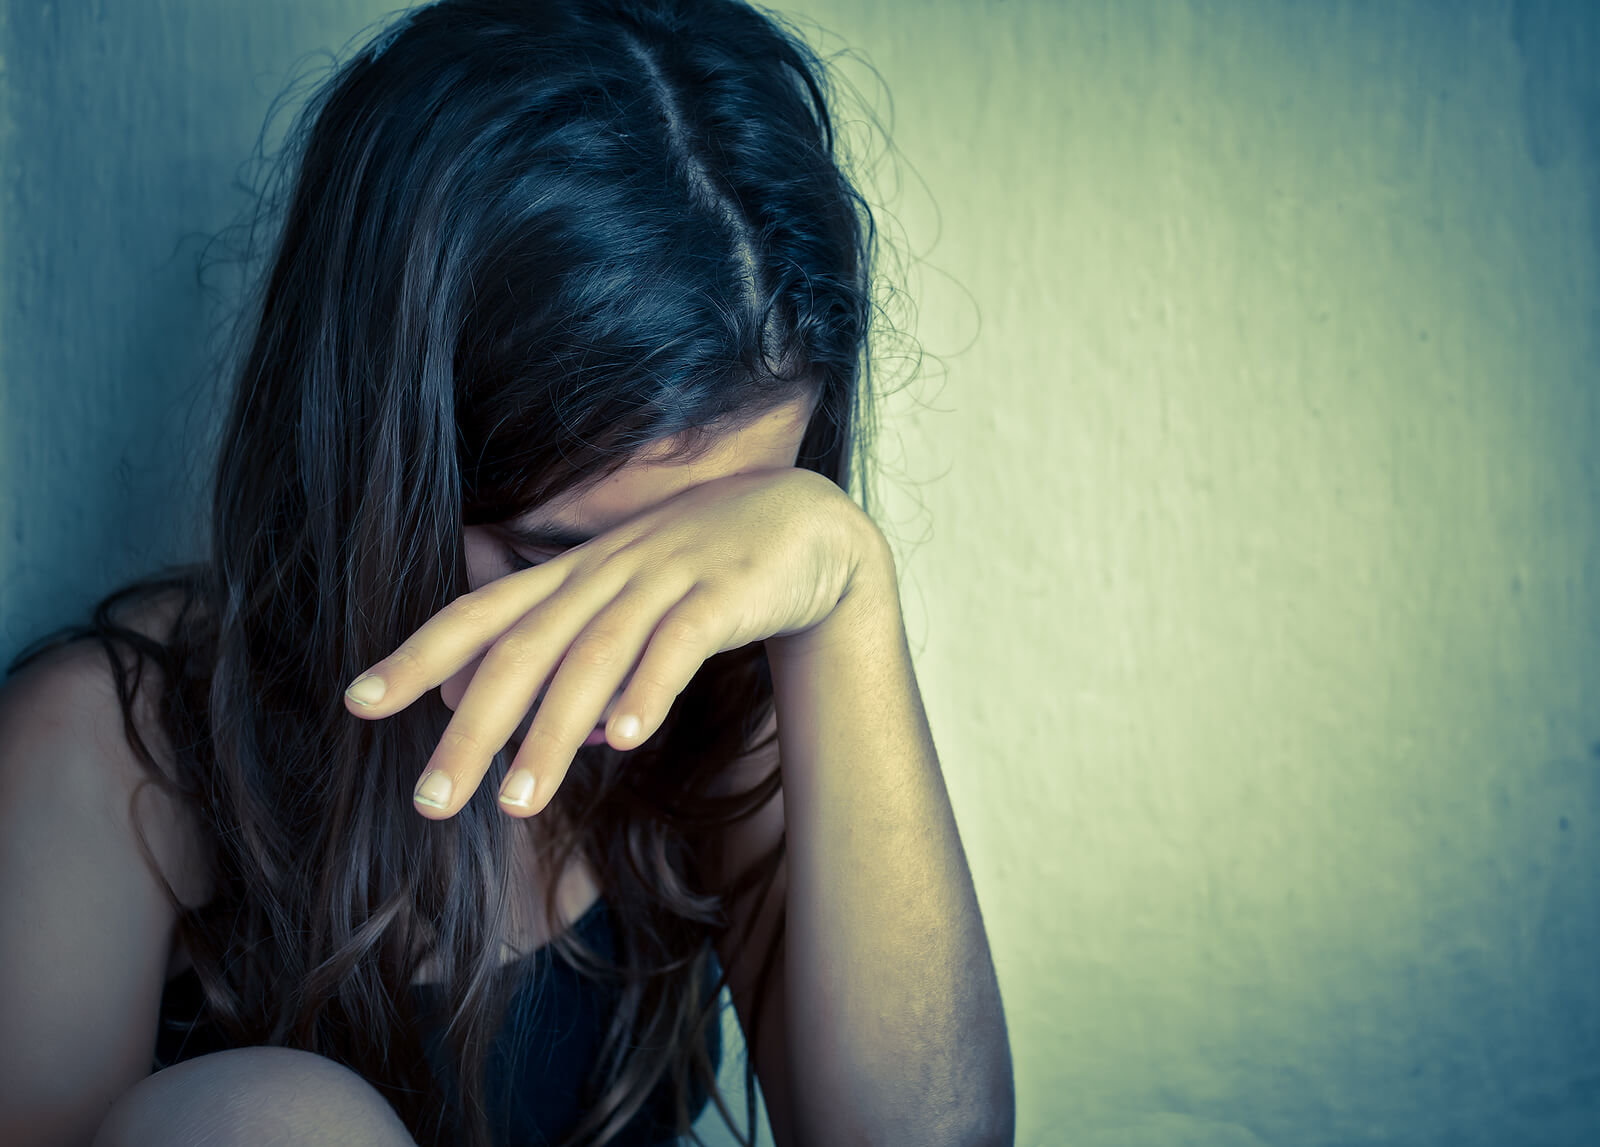 Young woman with her hand on her head representing the struggle with depression and ADHD. ADHD and depression often go hand in hand. ADHD-Focused Therapy for Depression can meet the needs for both. Learn more here.